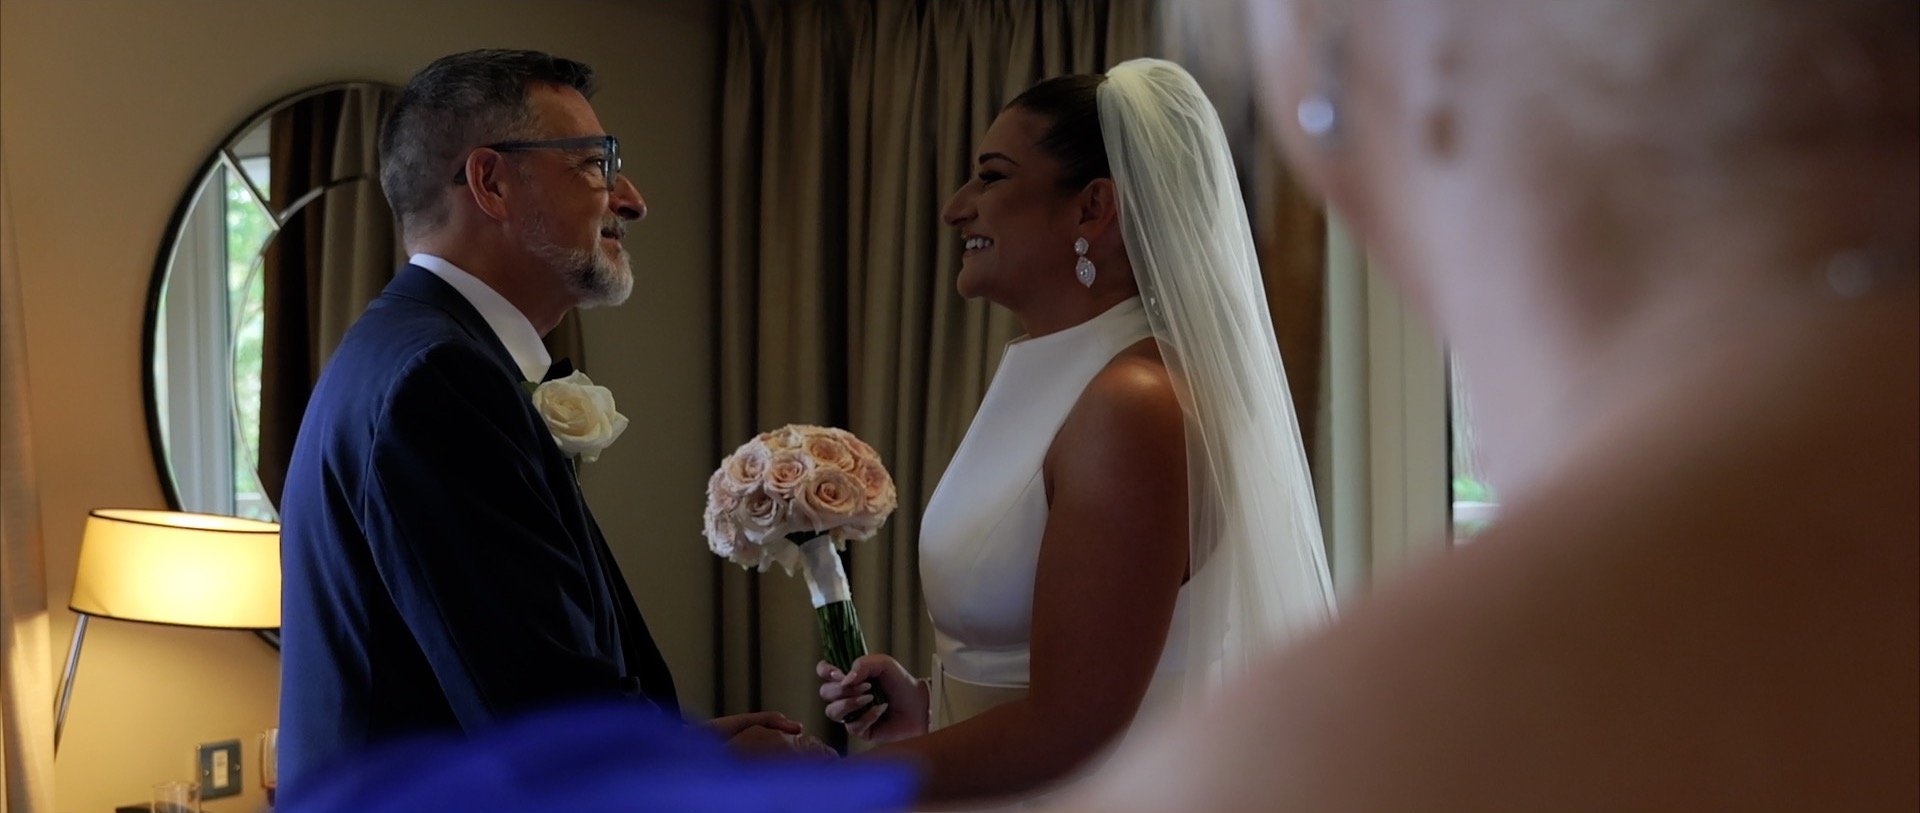 Sopwell House wedding videography - 3 Cheers Media - Father reactions bridal reveal.jpg